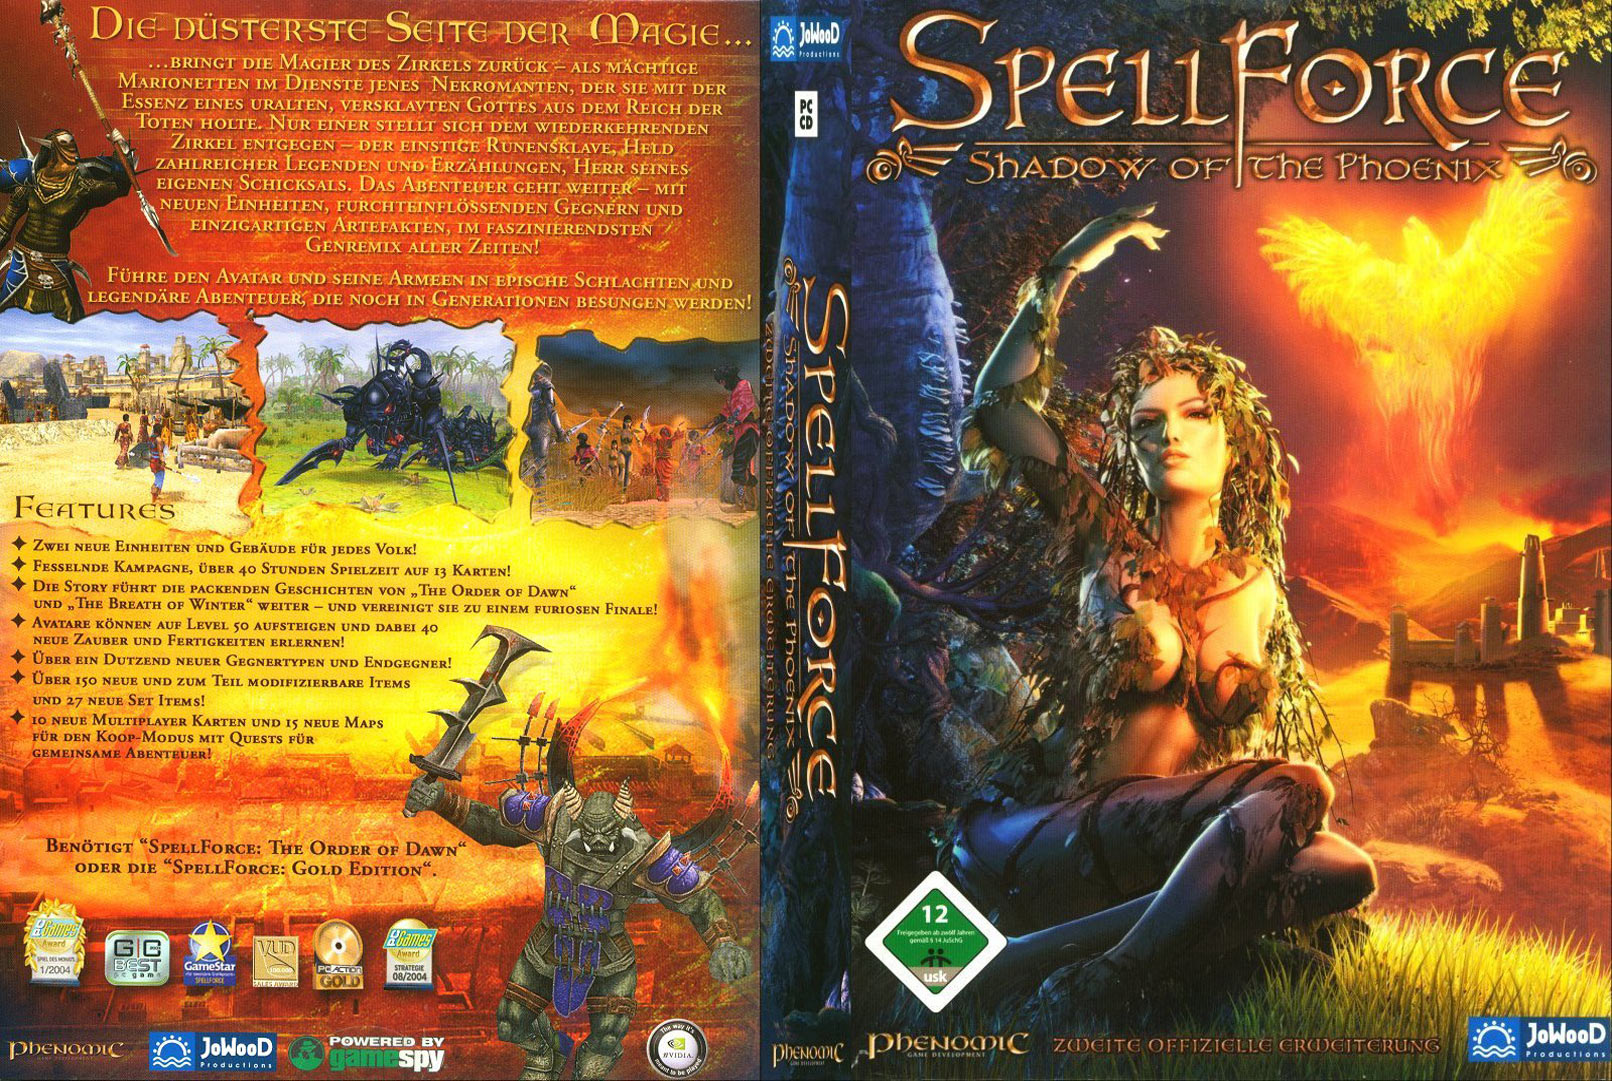 SpellForce: The Shadow of the Phoenix - DVD obal